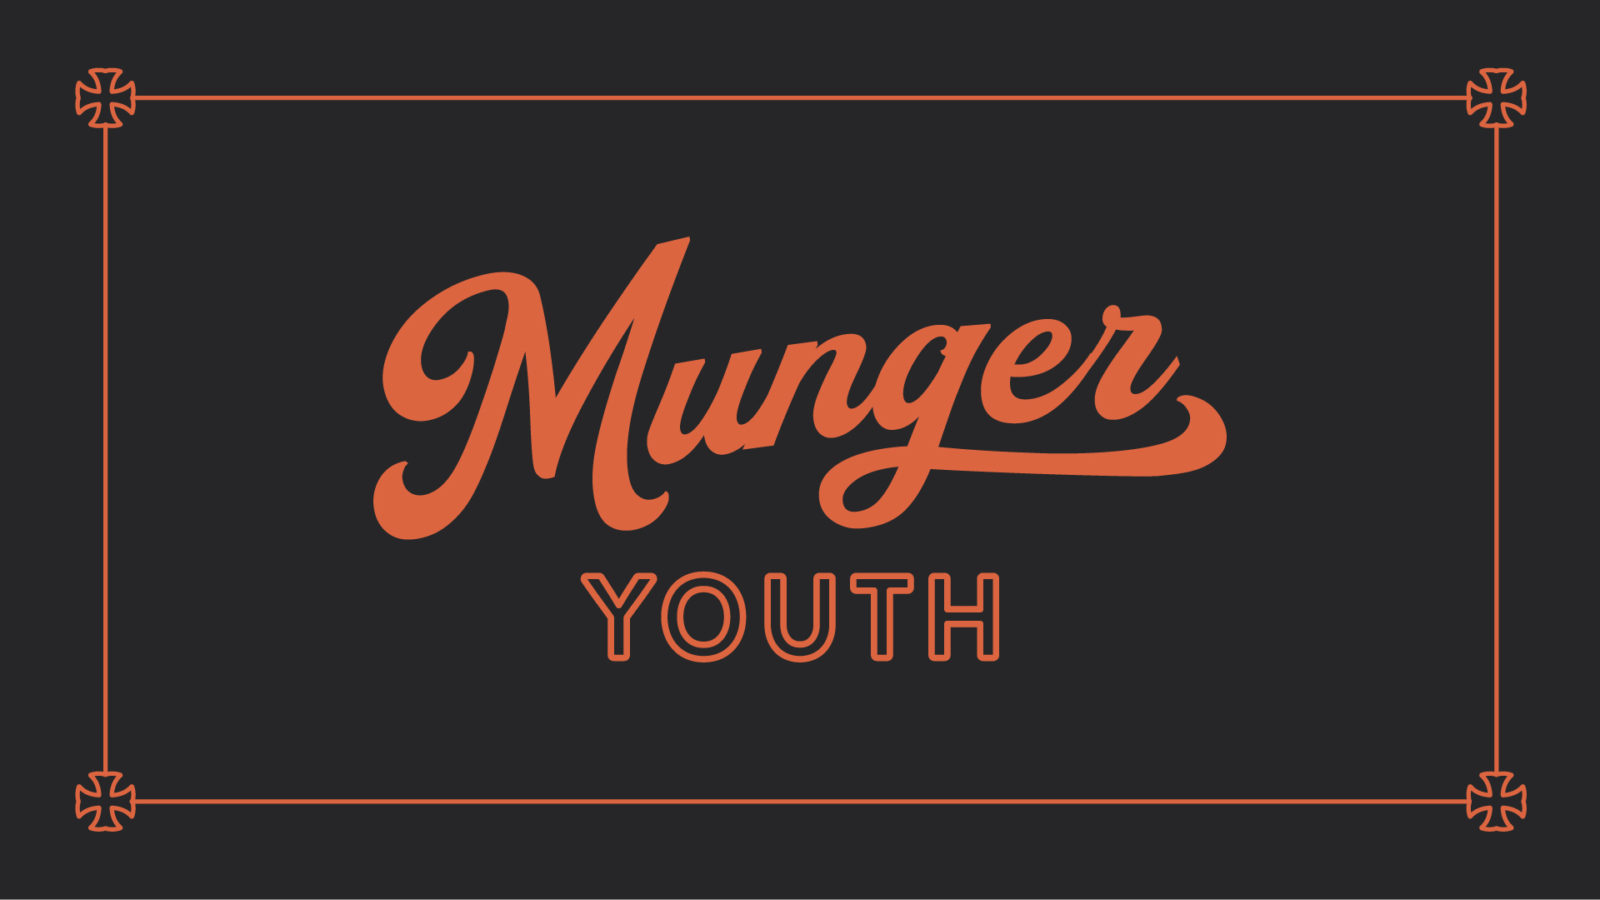 Munger Youth Student Life Camp